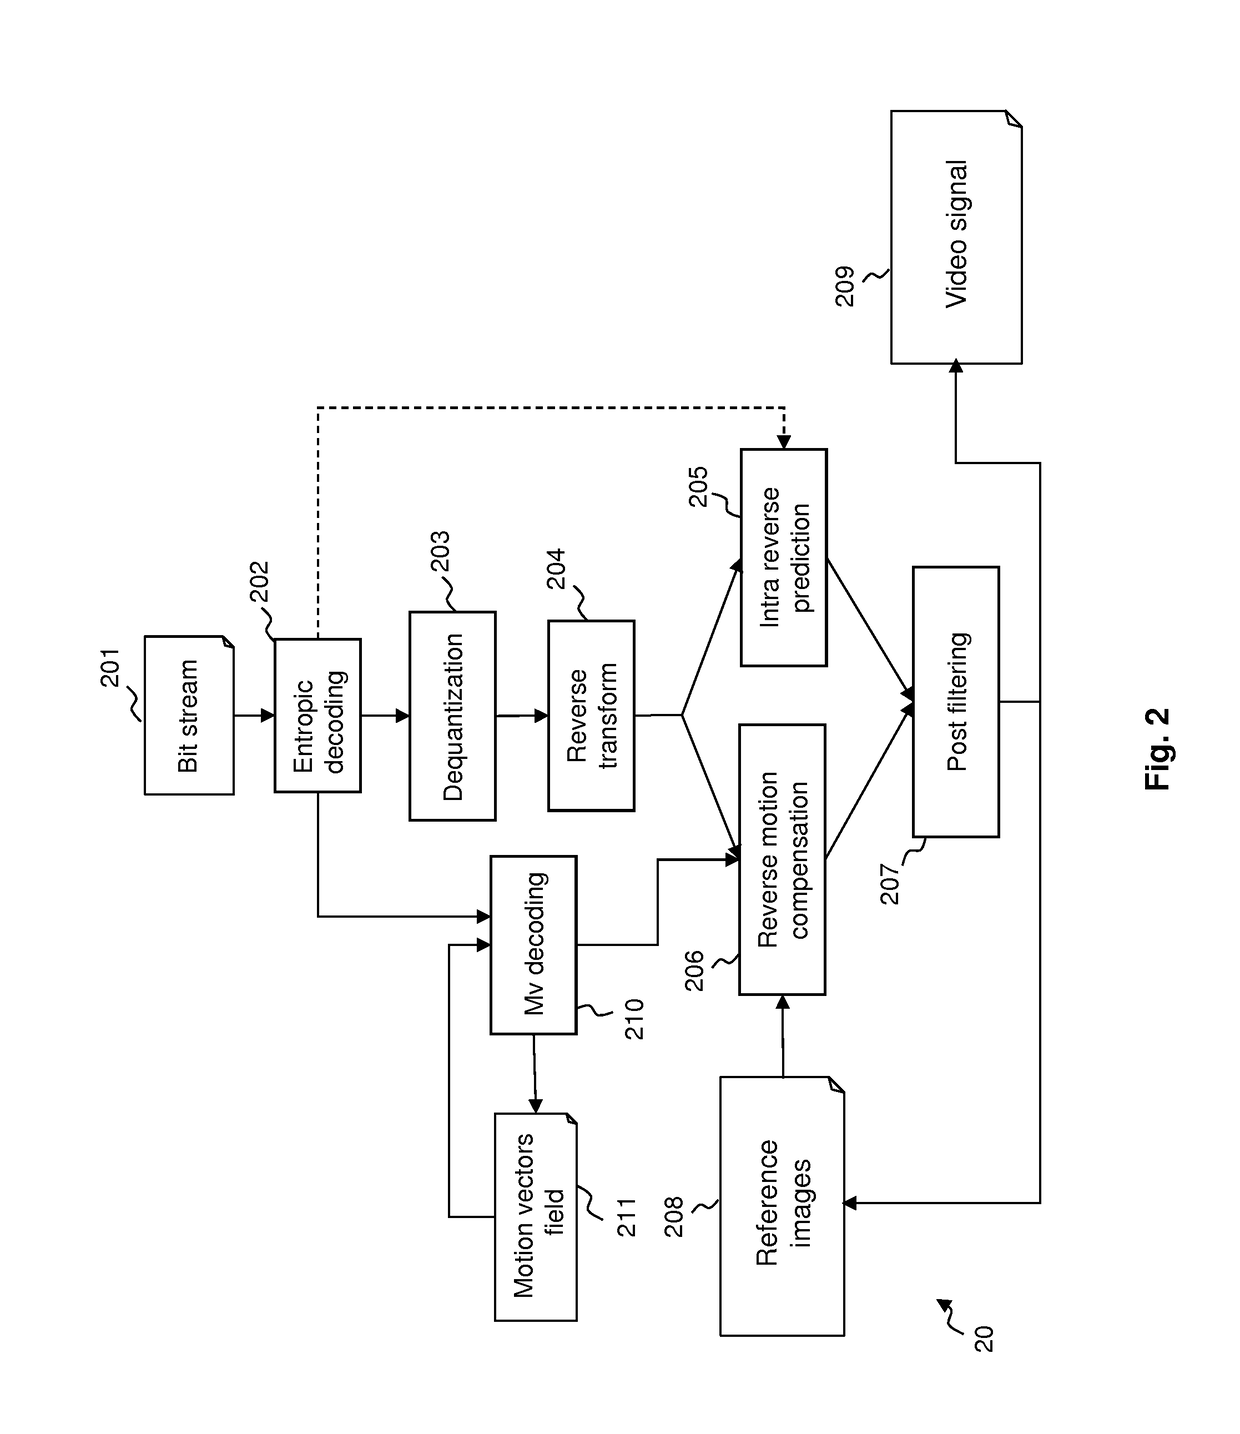 Palette predictor initializer when encoding or decoding self-contained coding structures